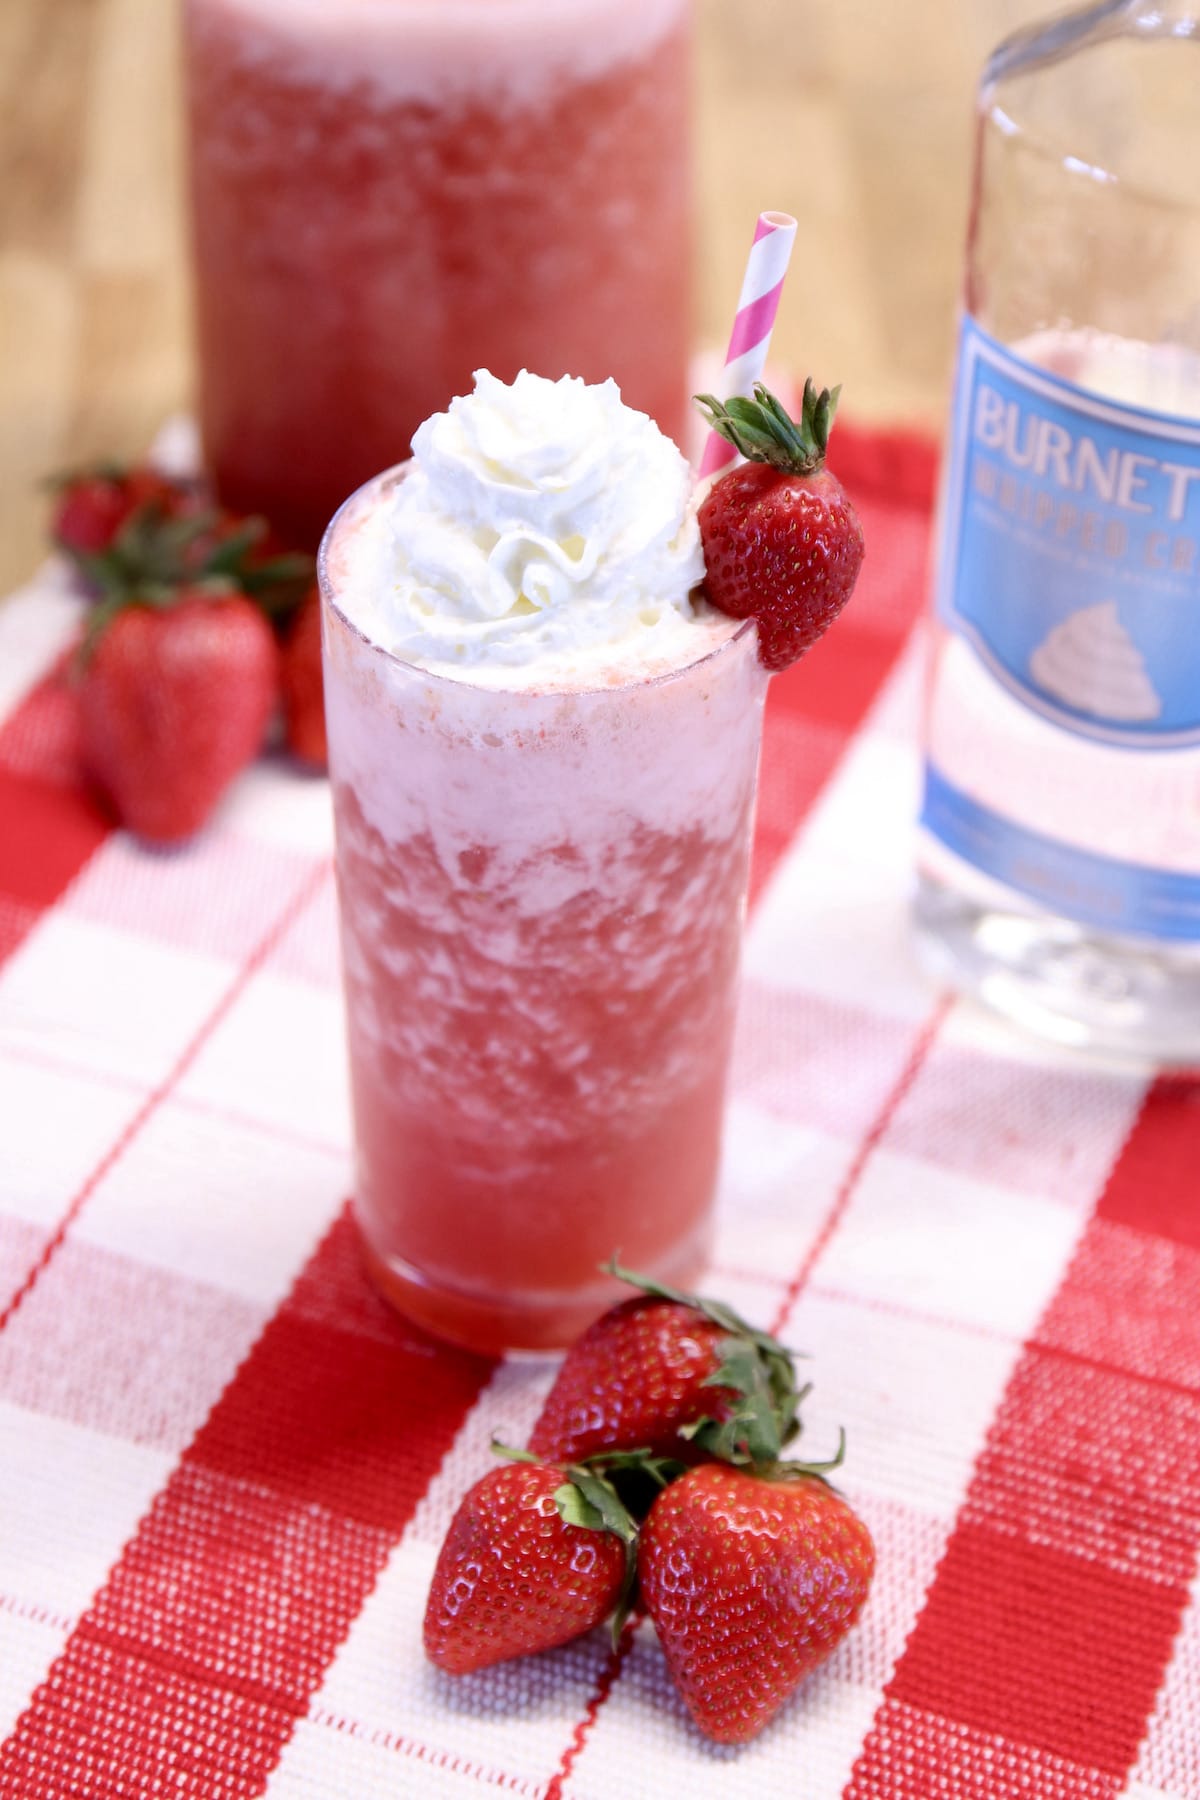 Strawberry cocktail with whipped cream garnish.